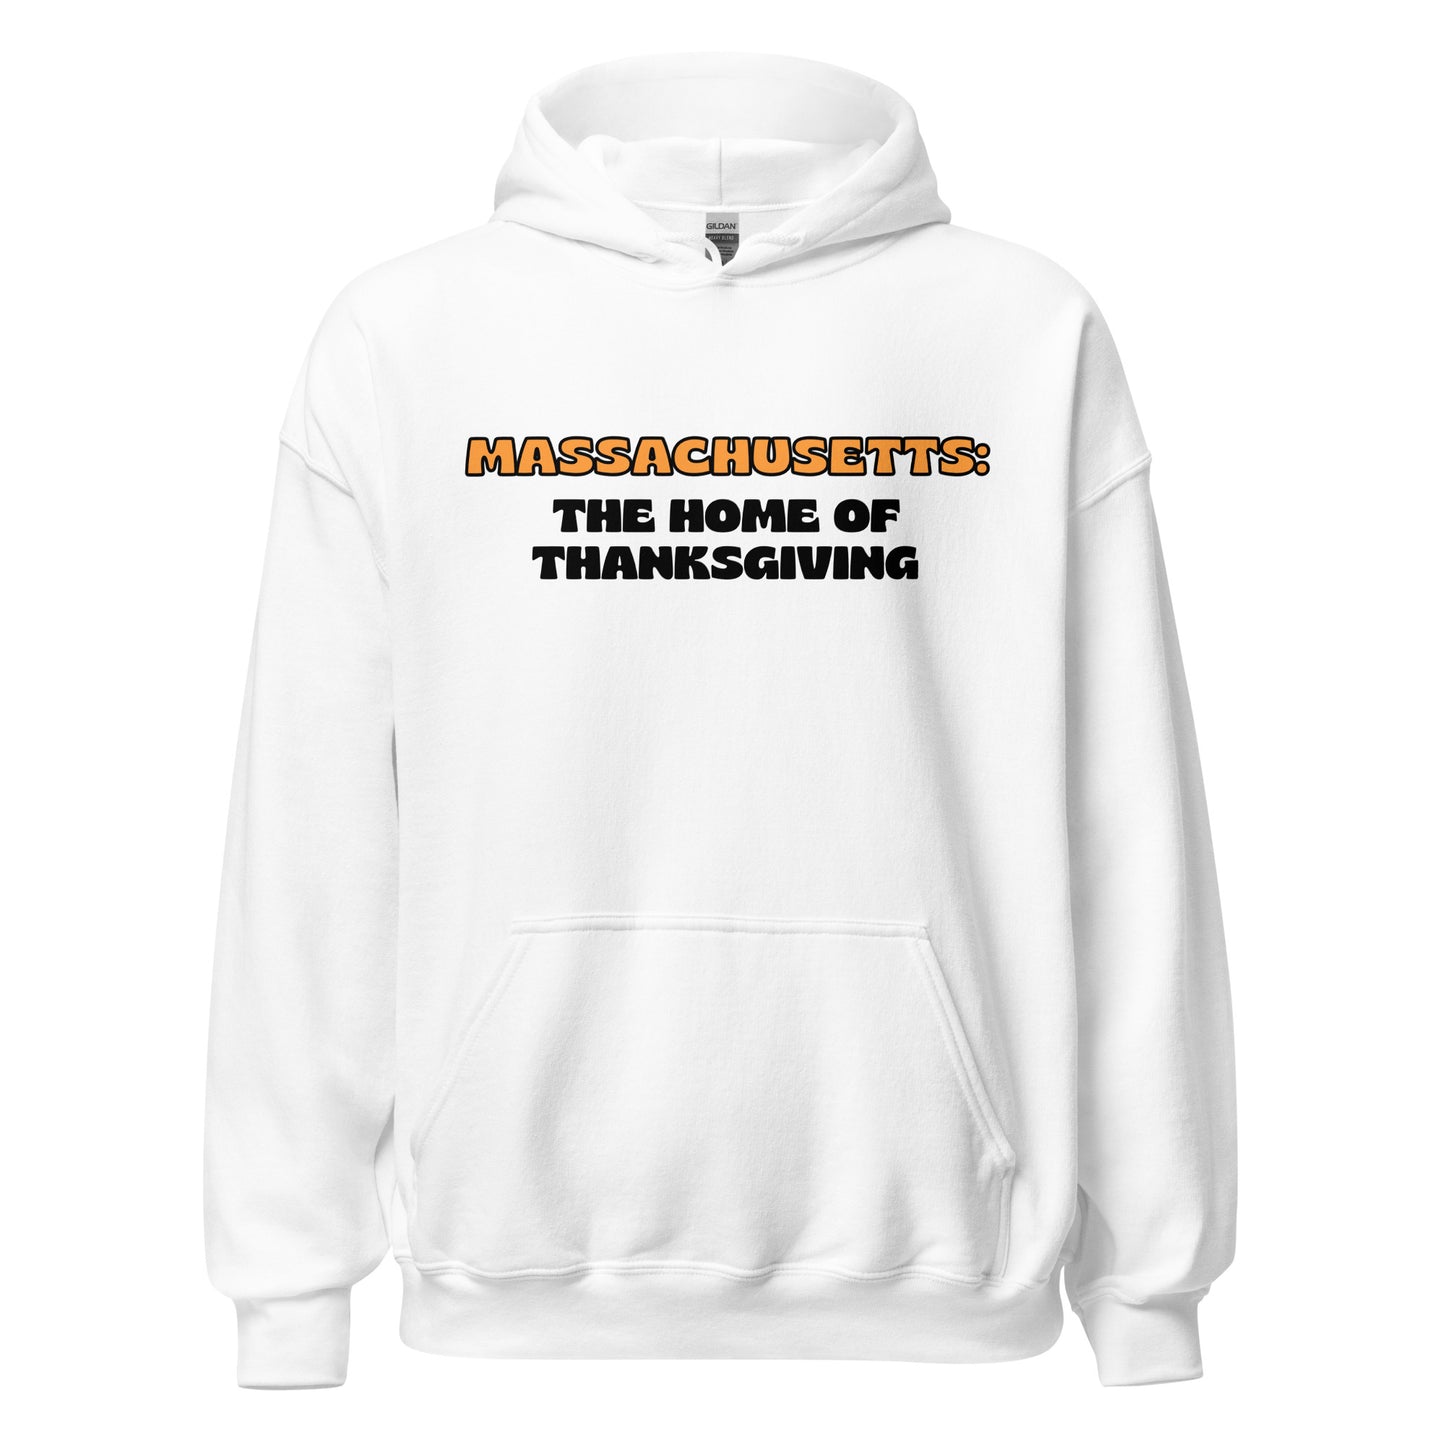 The Home of Thanksgiving Hoodie